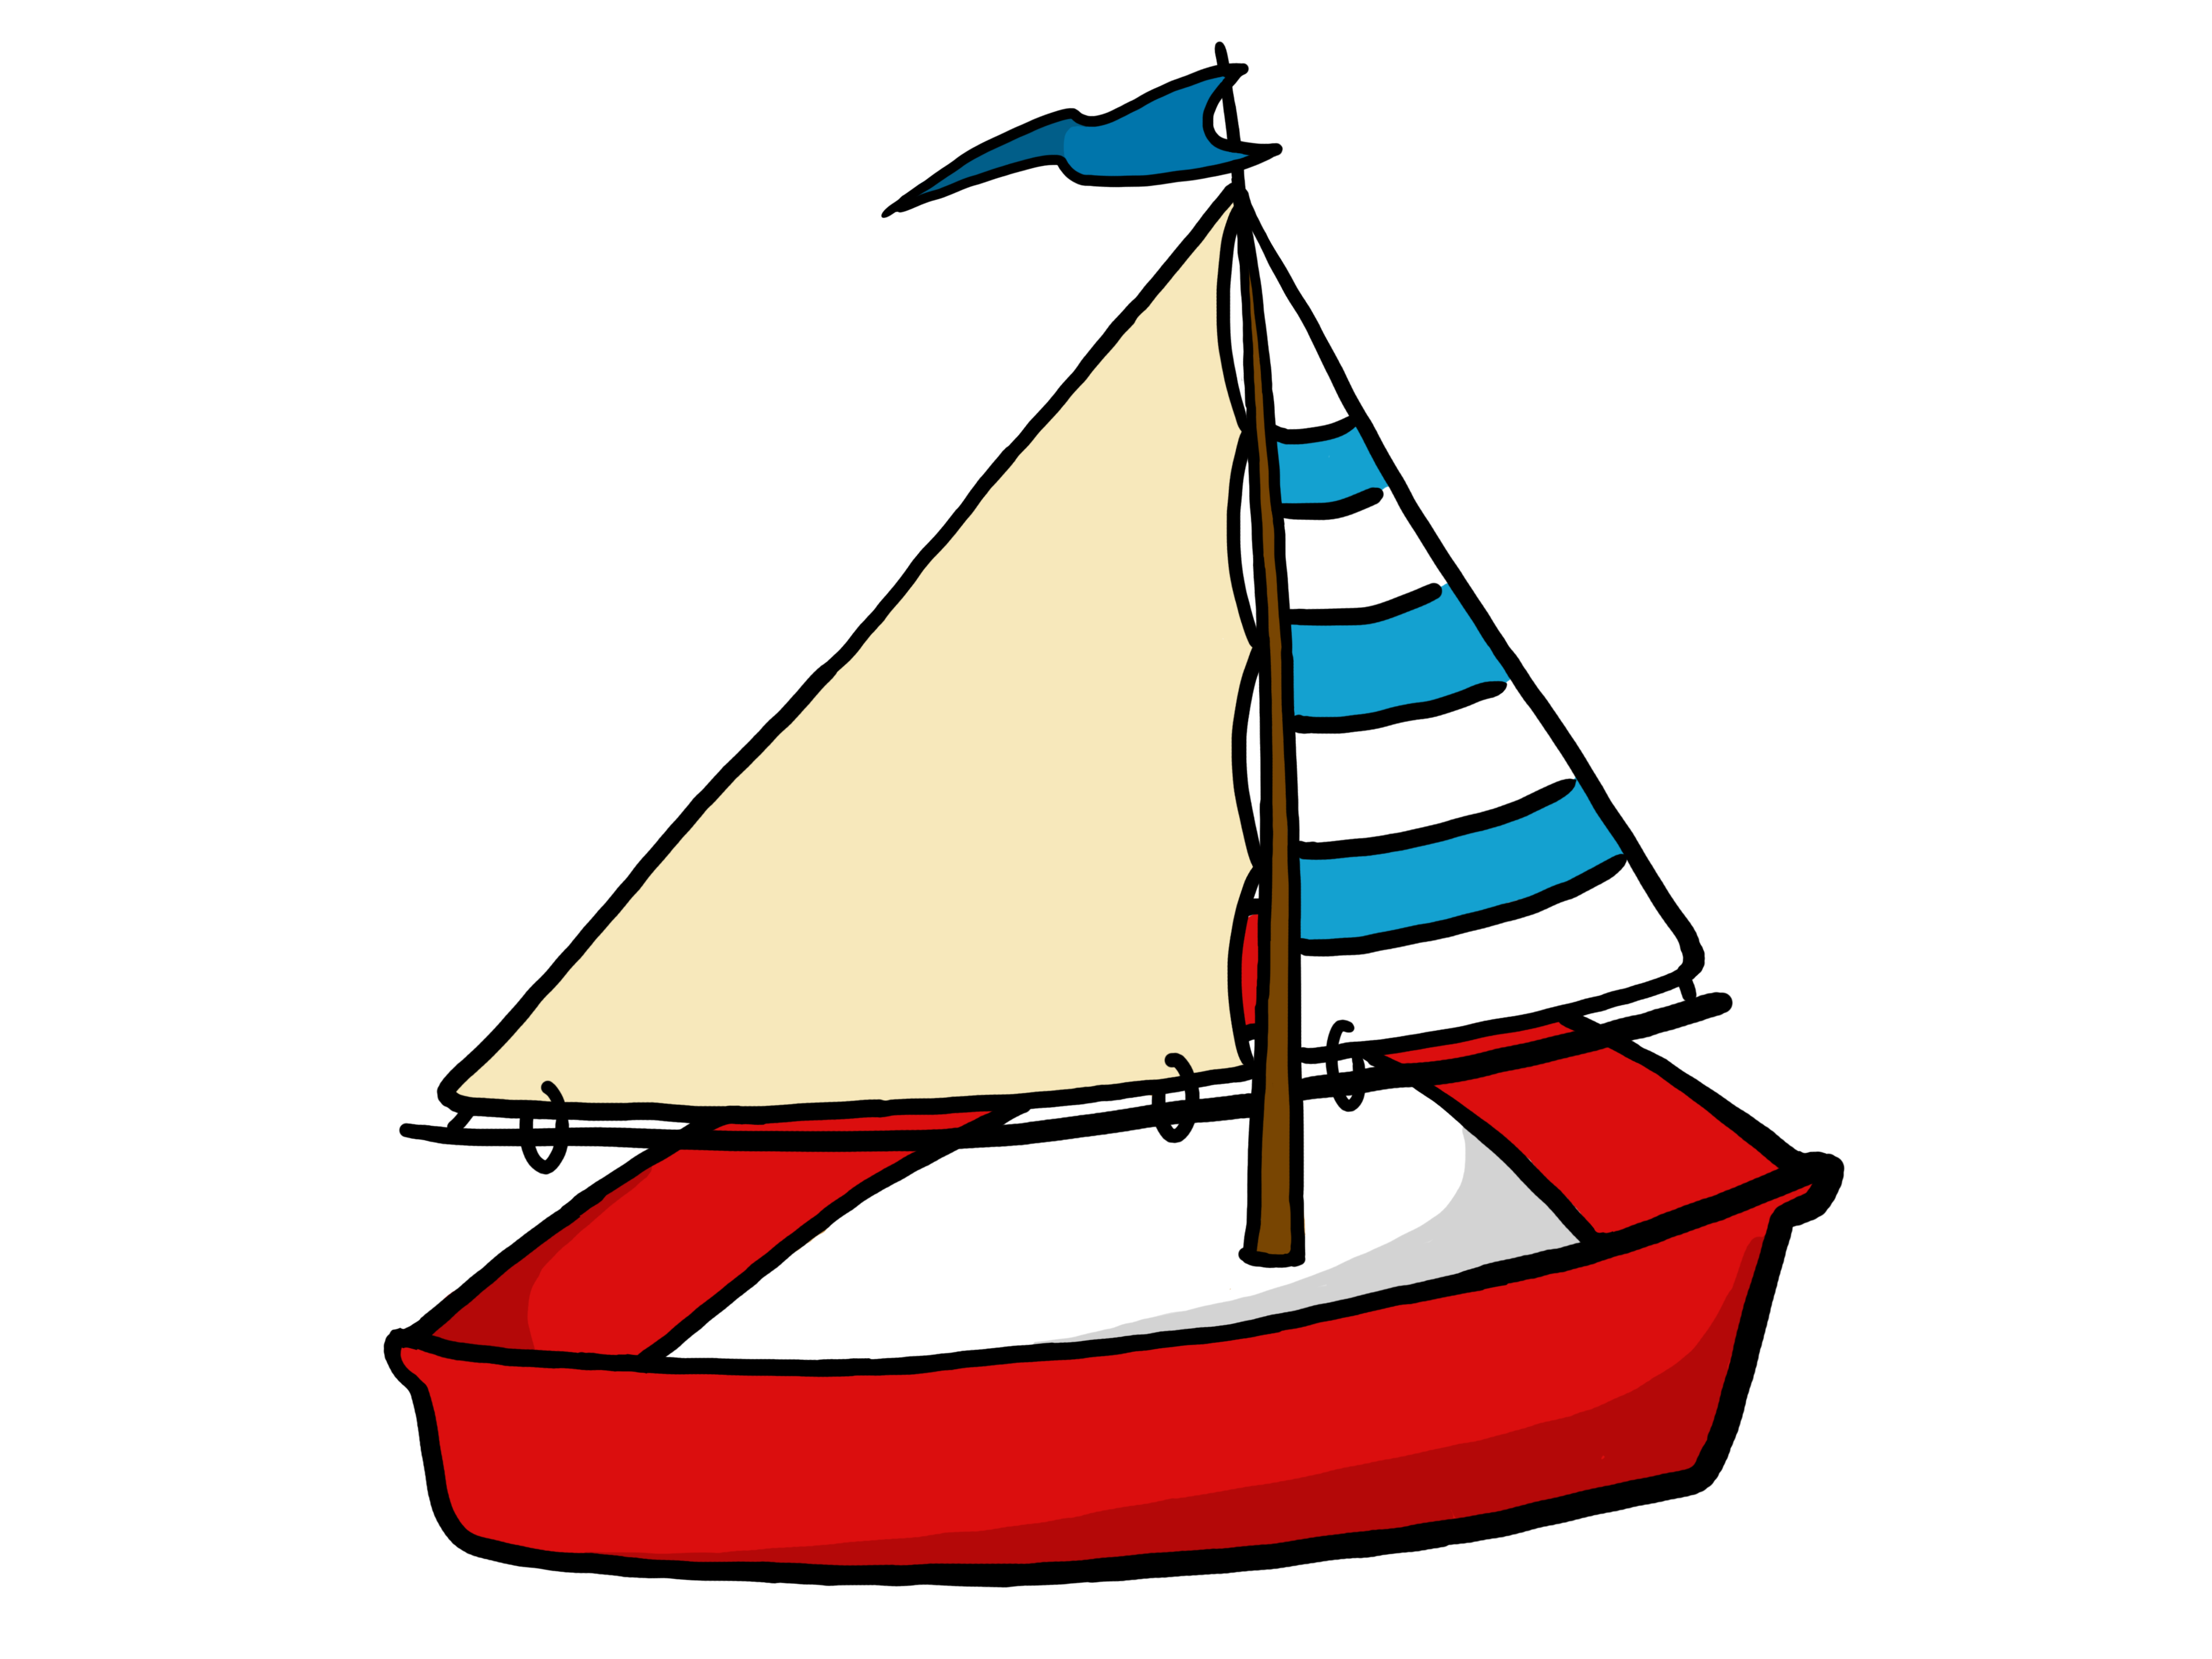 Ship boat clip art clipart free to use resource